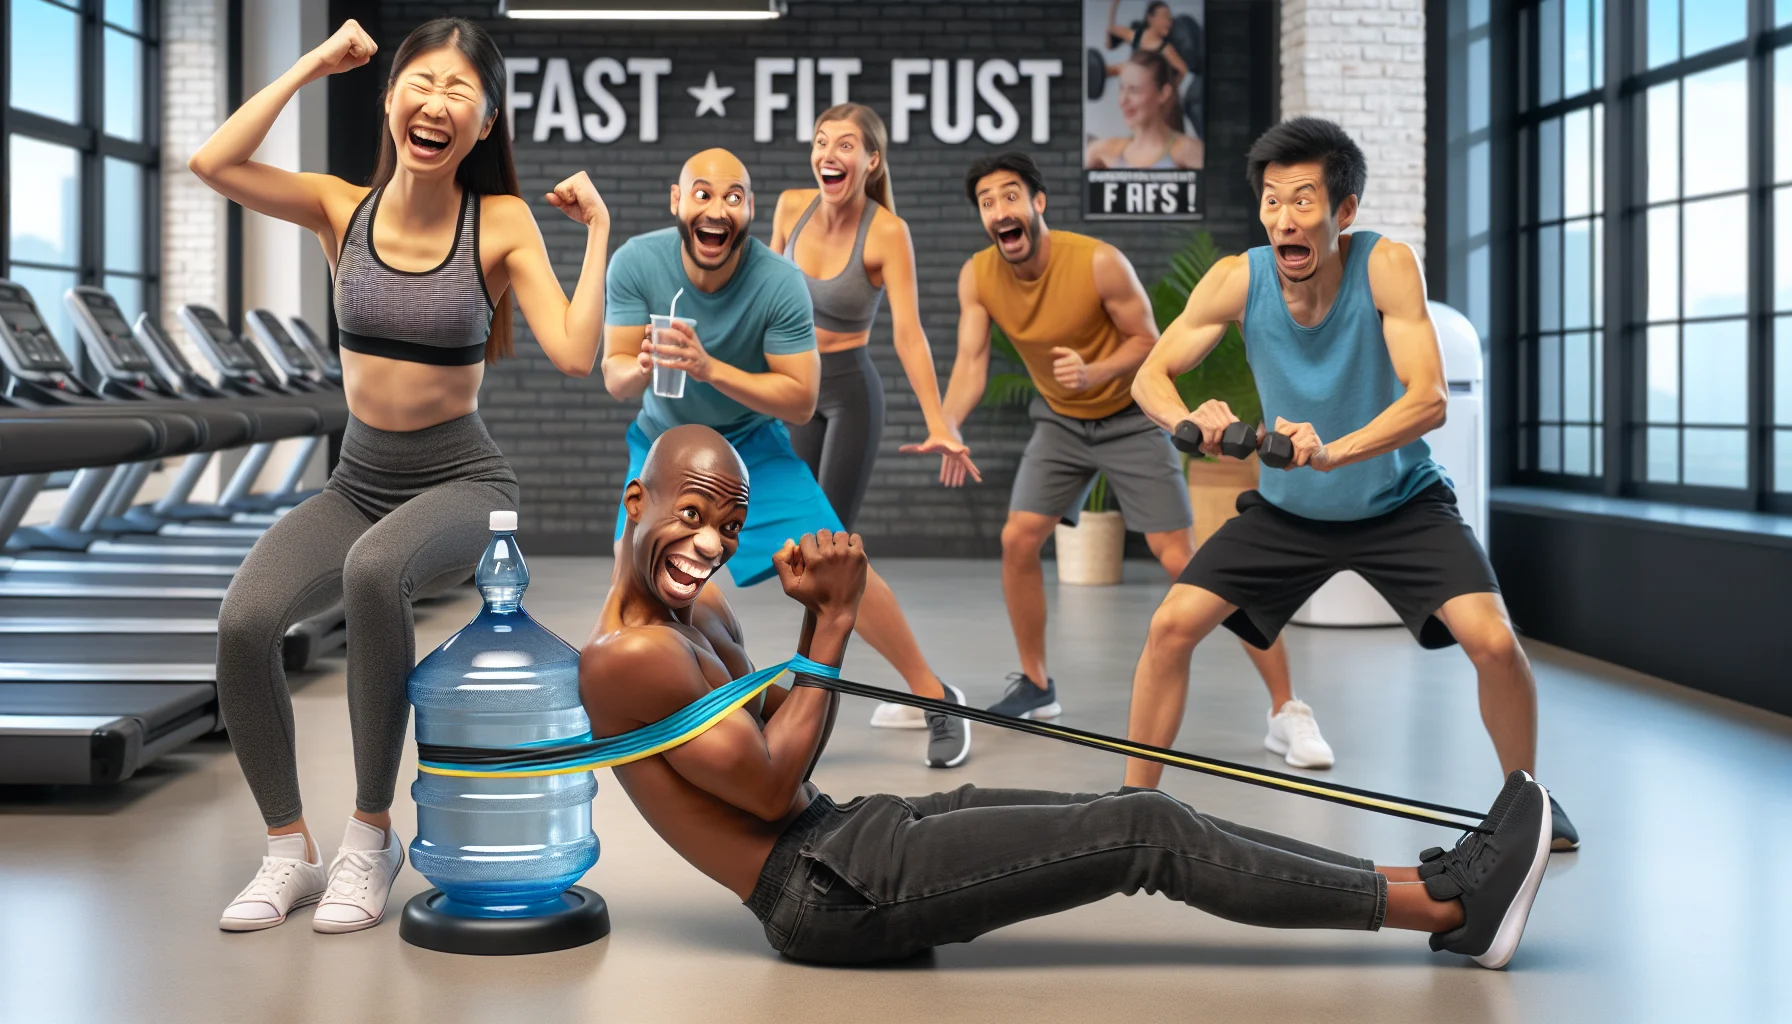 A humorous scene set in a modern gym where diverse individuals are participating in a fast fit body sculpting session. In the centre, there's an Asian woman laughing while attempting a challenging yoga pose. In the background, there is a Black man using a resistance band that's about to snap, and his surprised face suggests this isn't his first time repeating this situation. Also, a Middle-Eastern man, in a moment of distraction, is seen lifting a water dispenser instead of his dumbbell, to the amusement of the rest of the gym-goers. This light-hearted, fun-filled environment should capture the joy of exercising and motivate others to join in.